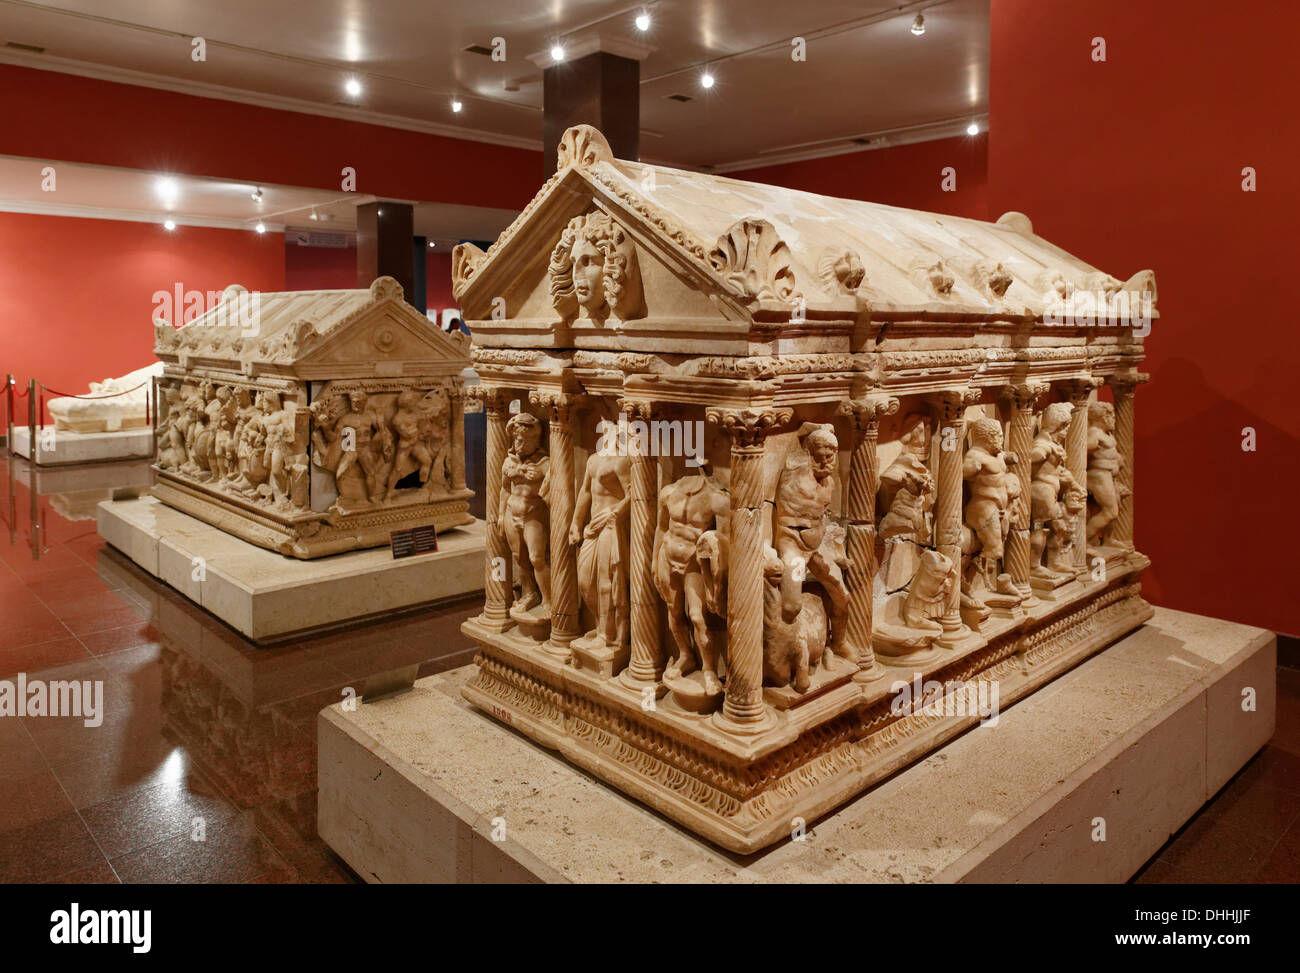 Archaeological Museum, sarcophagus of Hercules from Perge, 2nd century AD, Antalya, Antalya Province, Turkey Stock Photo